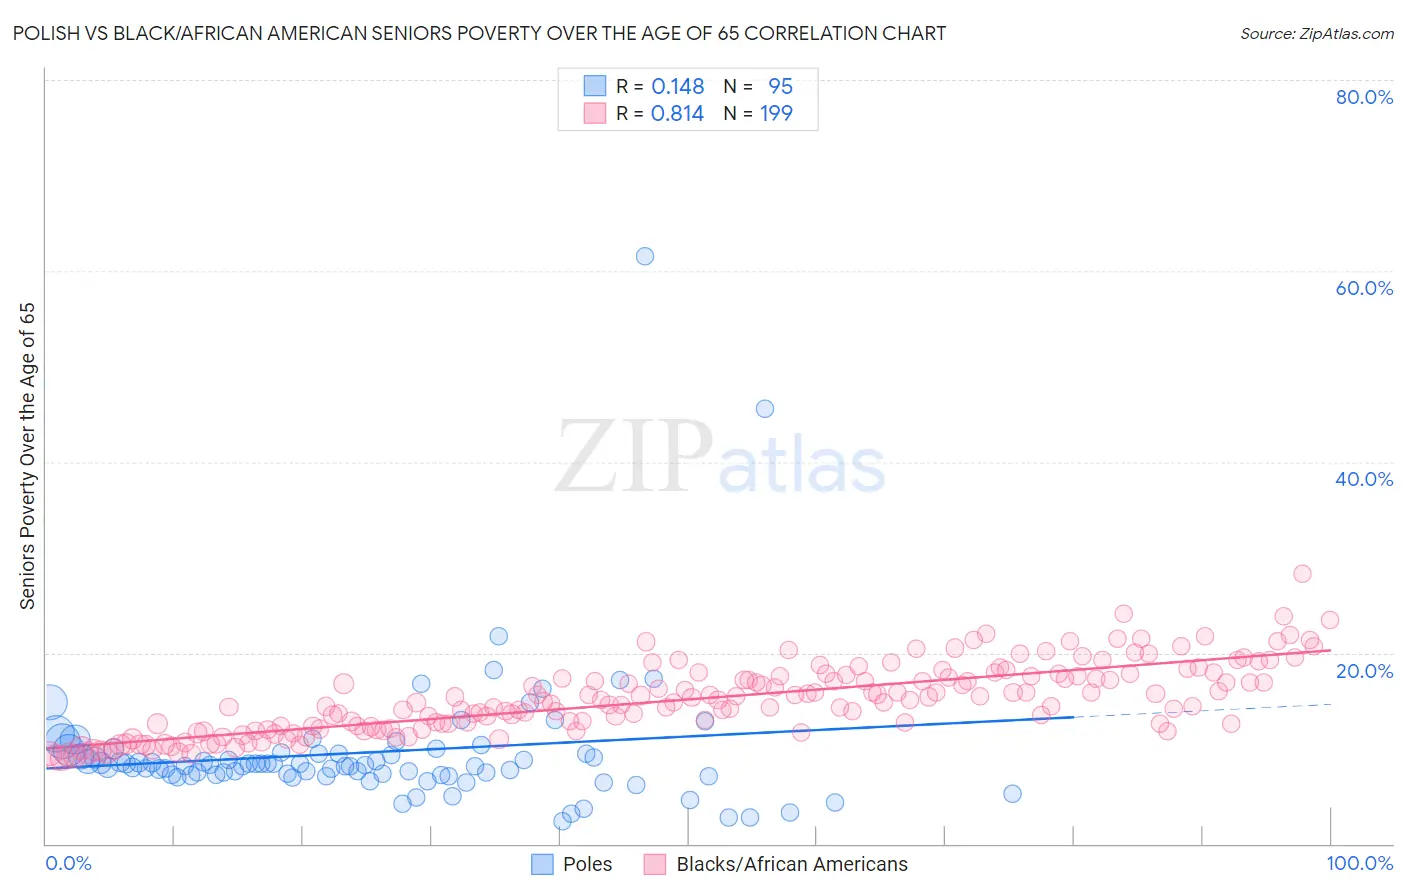 Polish vs Black/African American Seniors Poverty Over the Age of 65